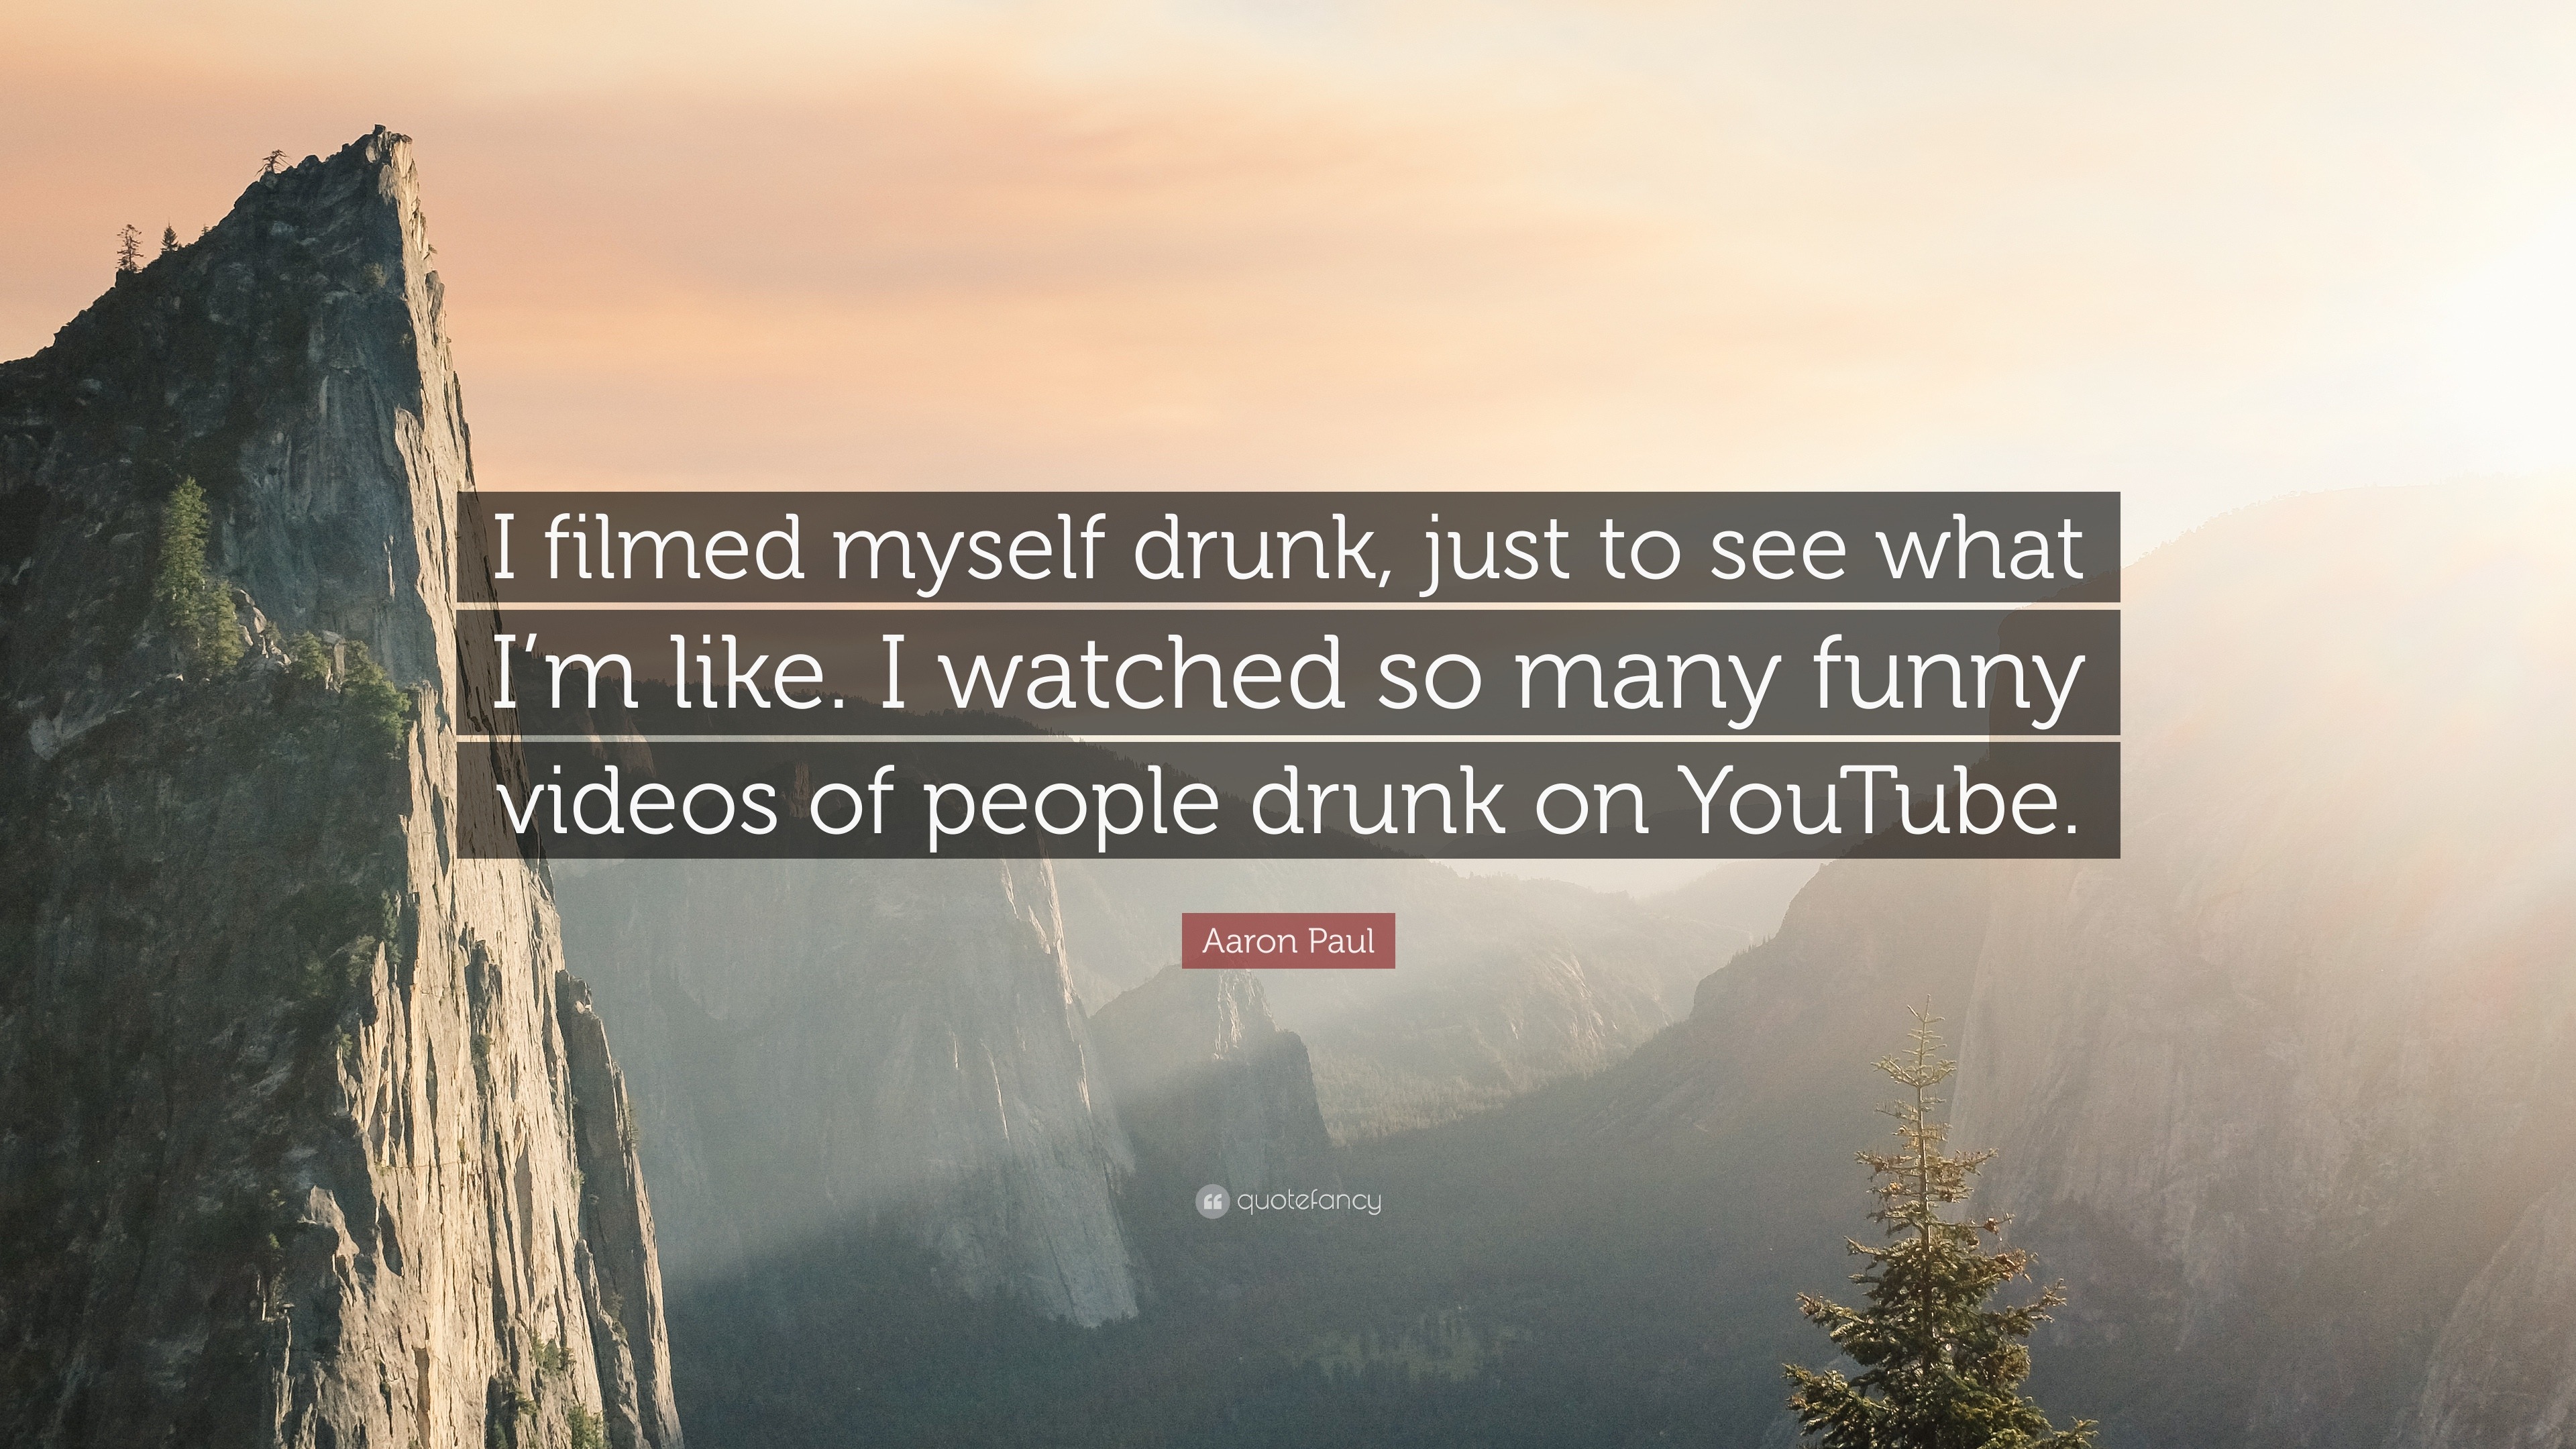 Aaron Paul Quote: “I filmed myself drunk, just to see what I'm like. I  watched